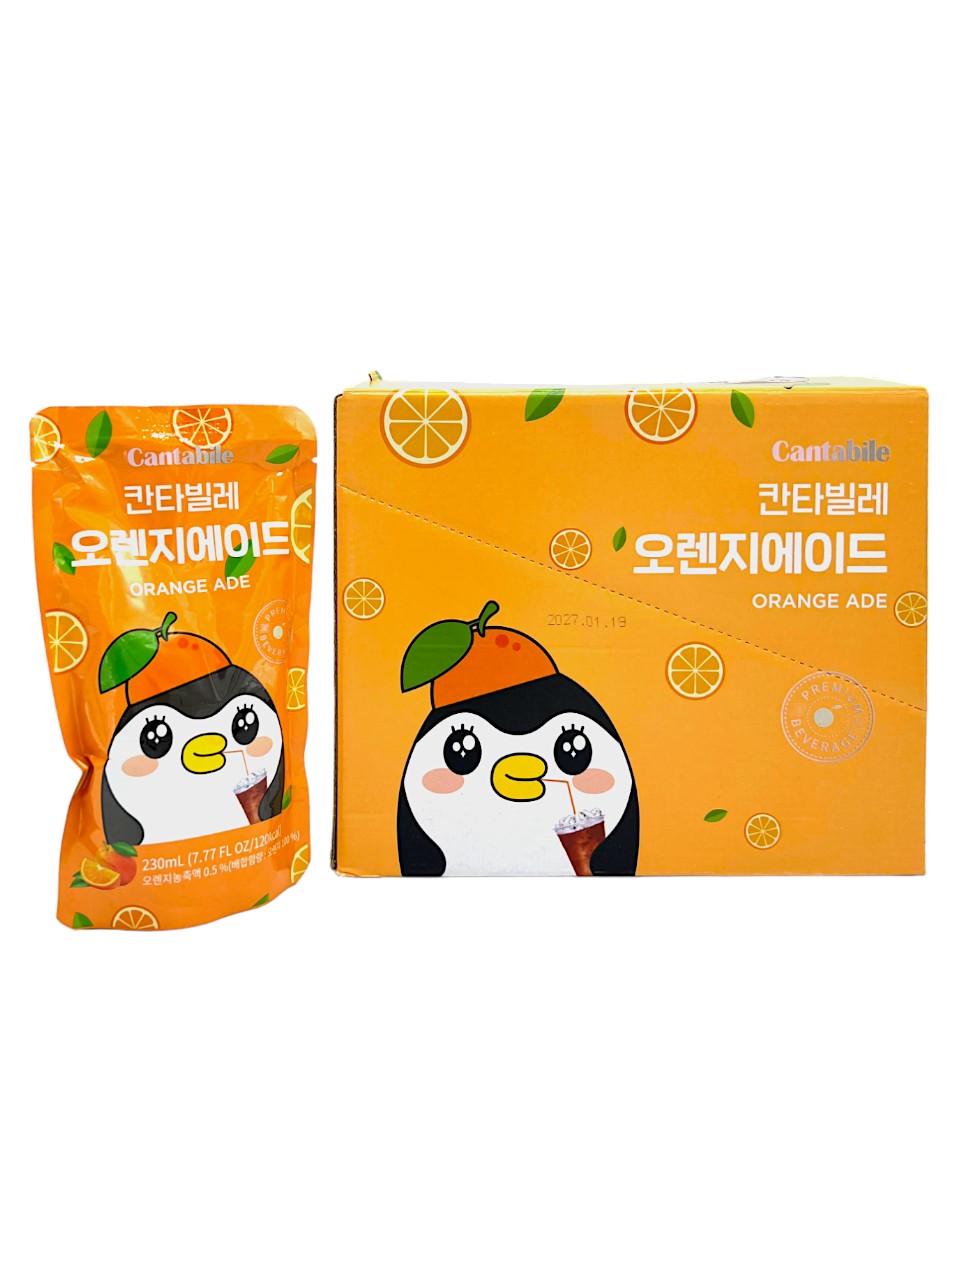 Cantabile Orange Ade Pouch Drink pack of 10x230ml (Korea)